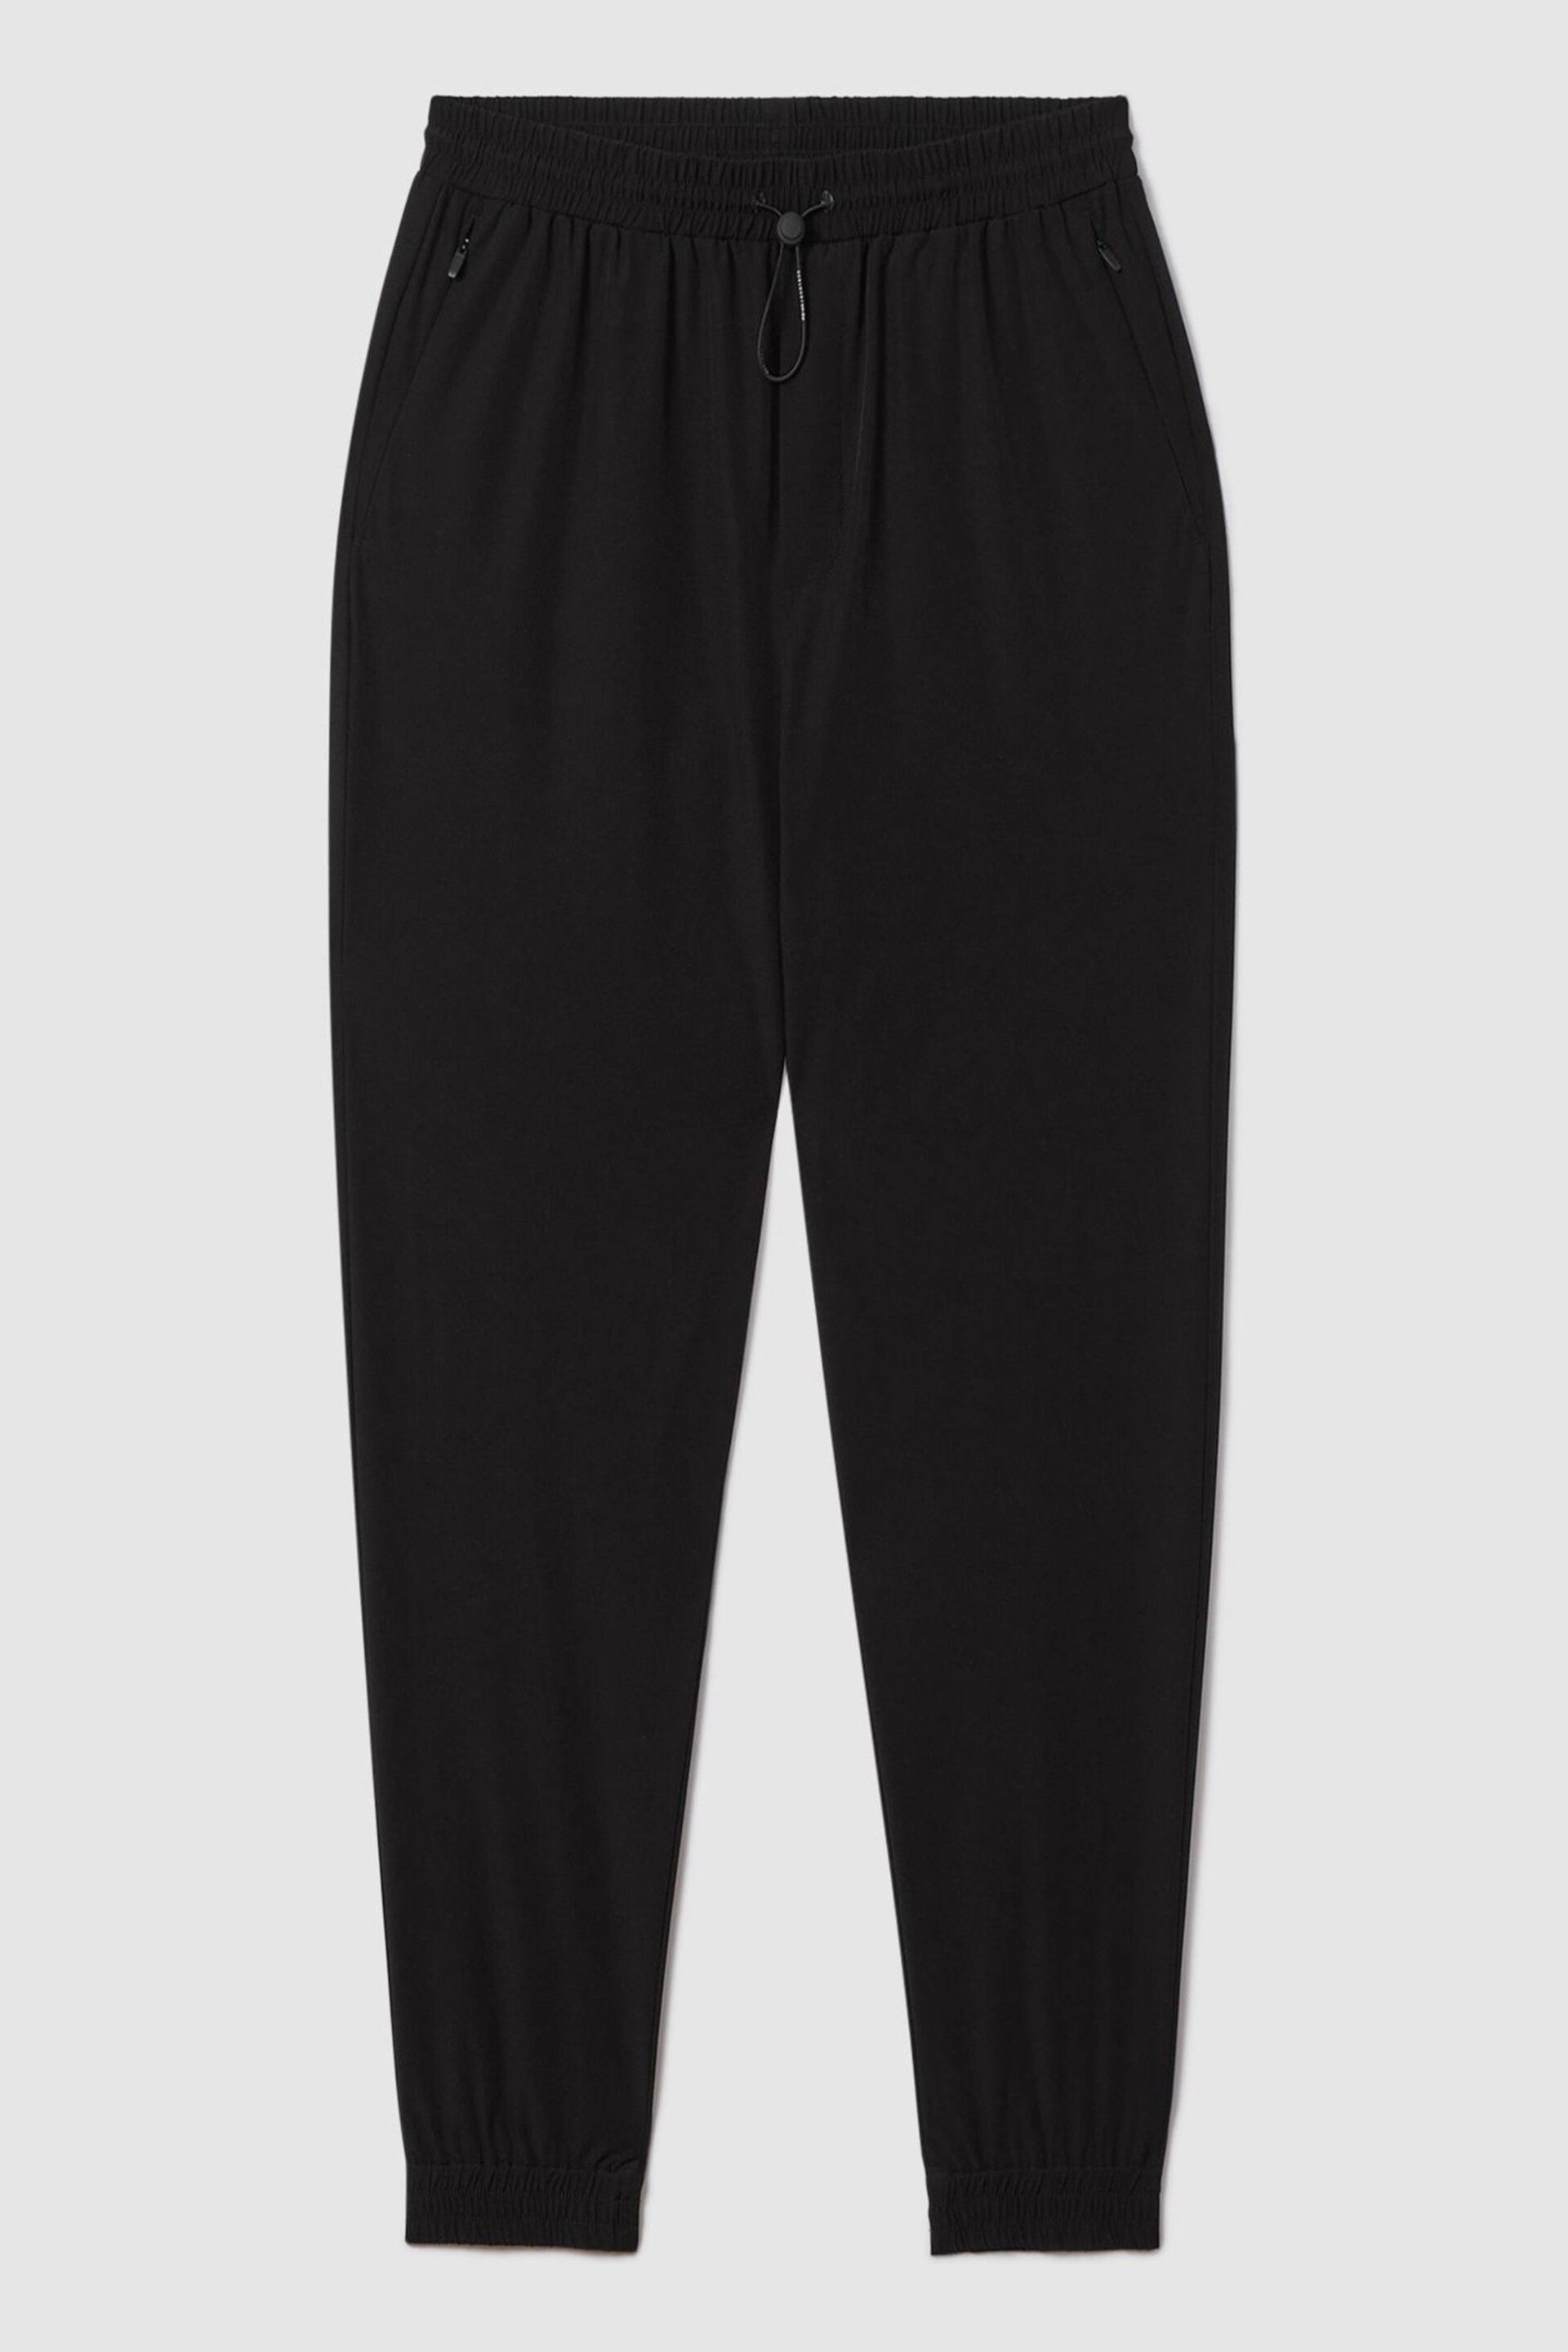 Reiss Onyx Black Dax Castore Water Repellent Track Pants - Image 2 of 8